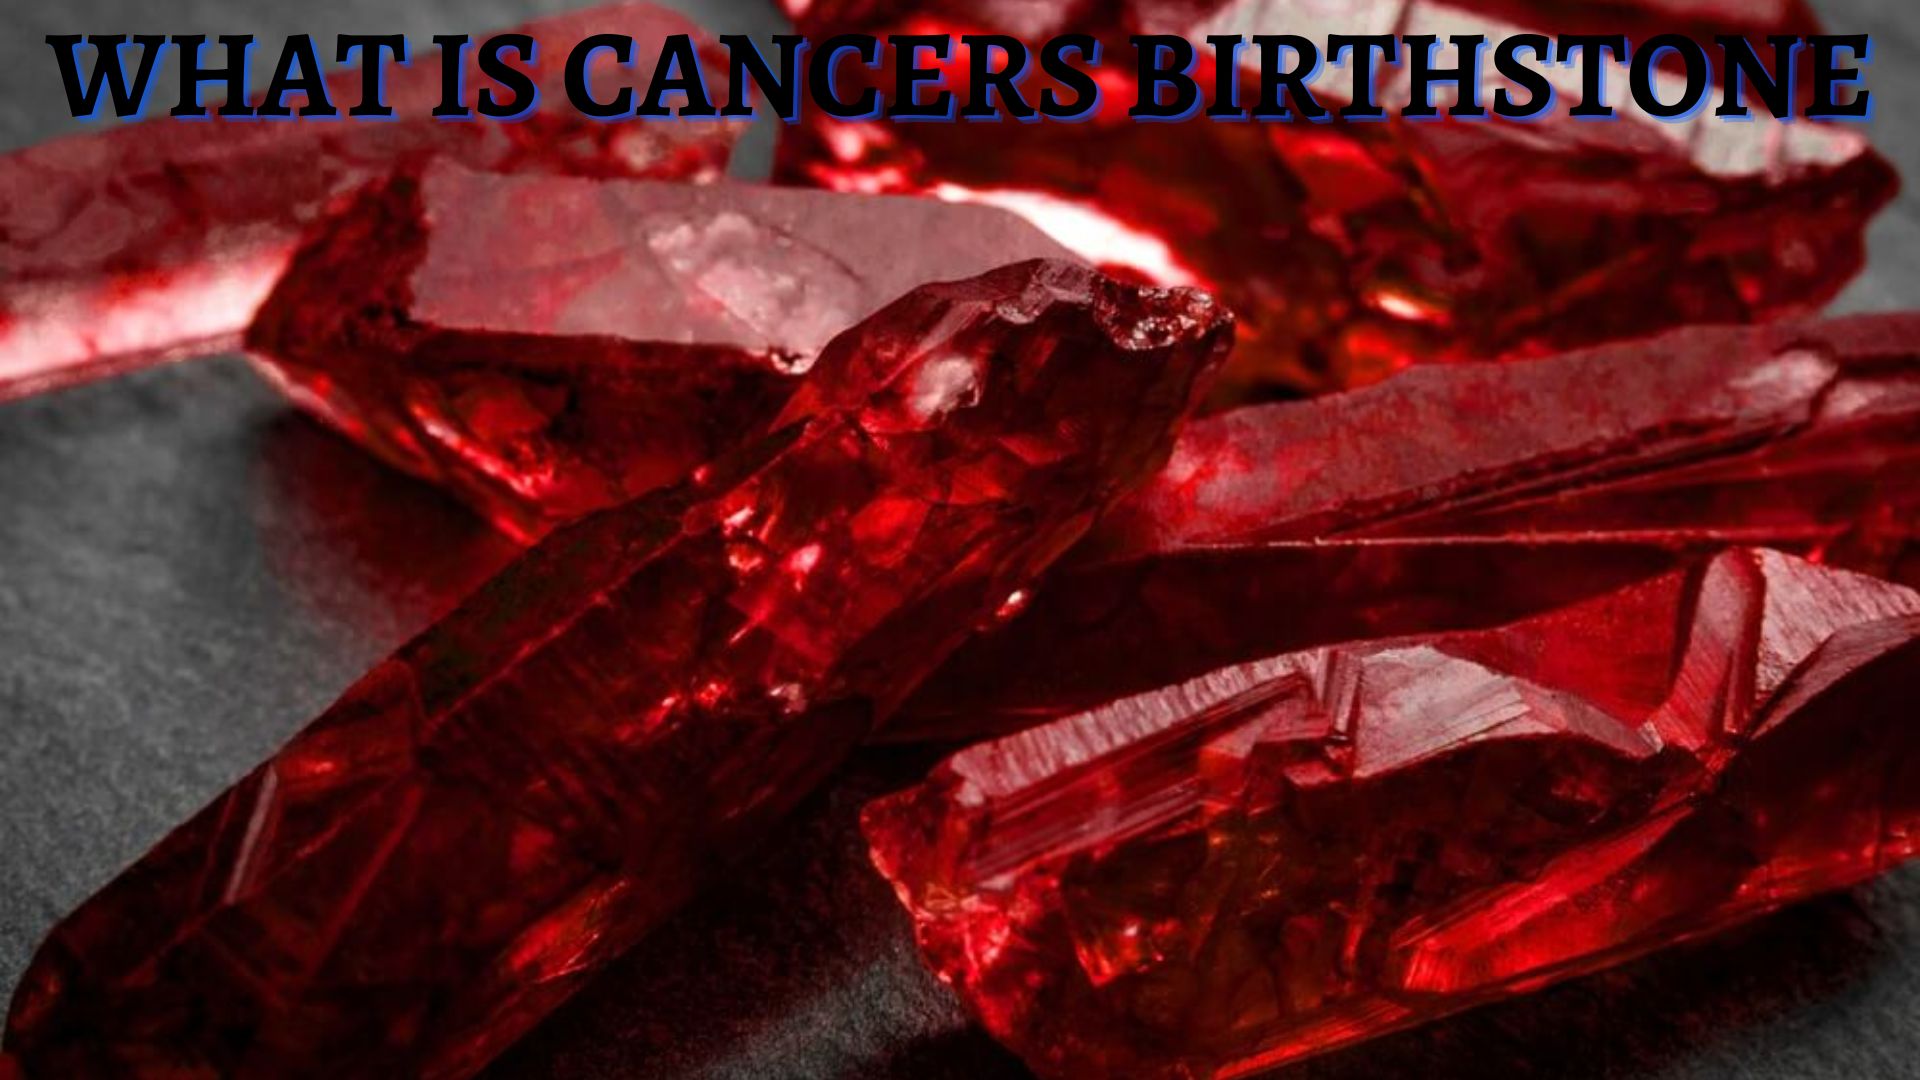 What Is Cancers Birthstone?